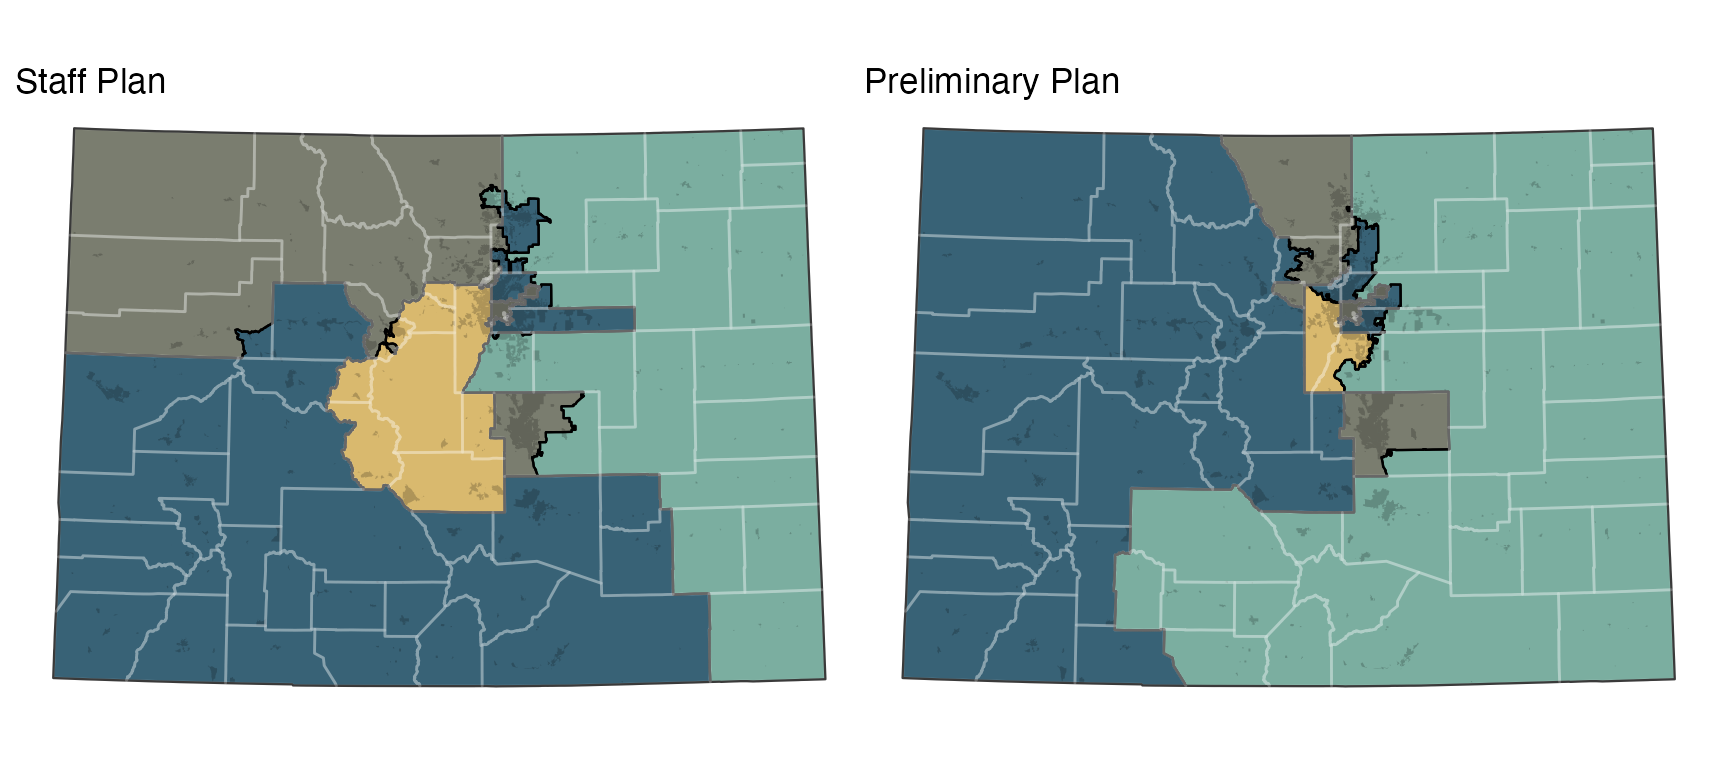 The preliminary congressional districting plans.